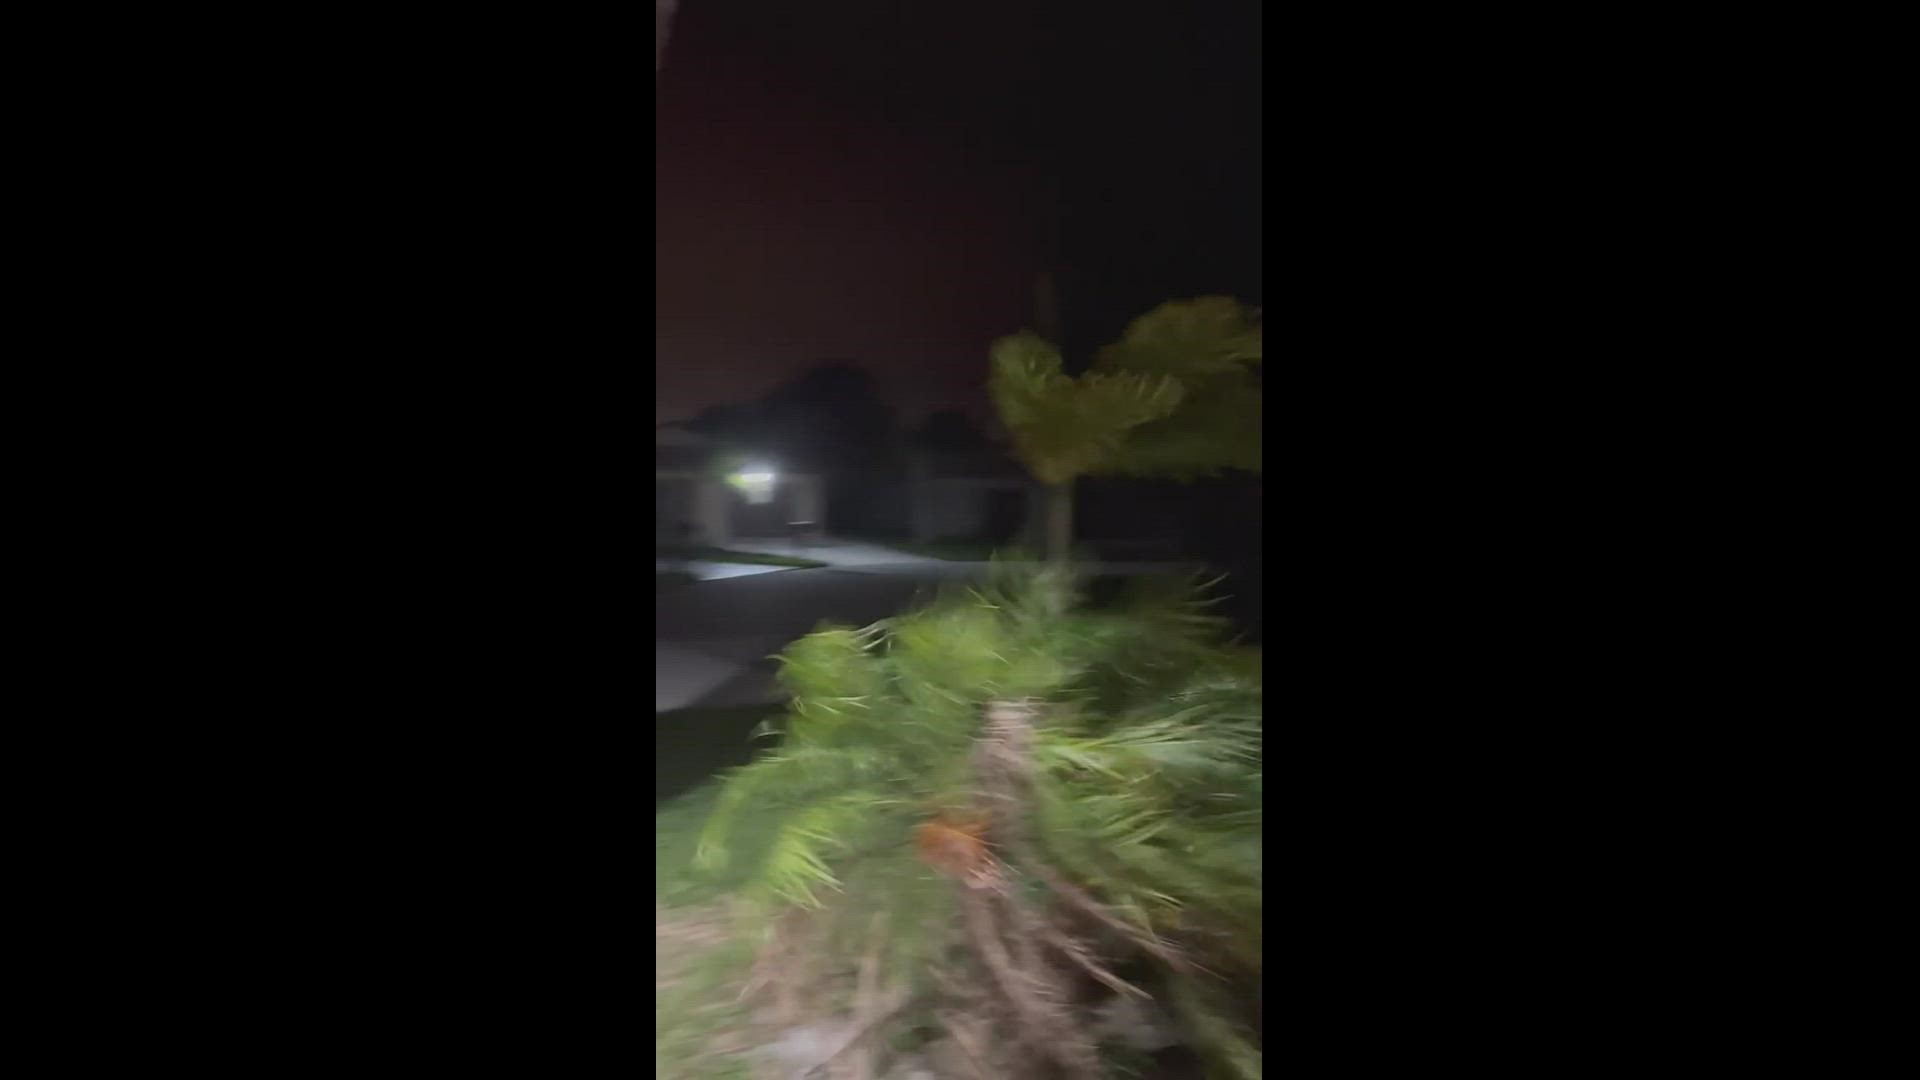 Michele Skidmore says she captured this video. She says it was taken in Fort Pierce, Florida.